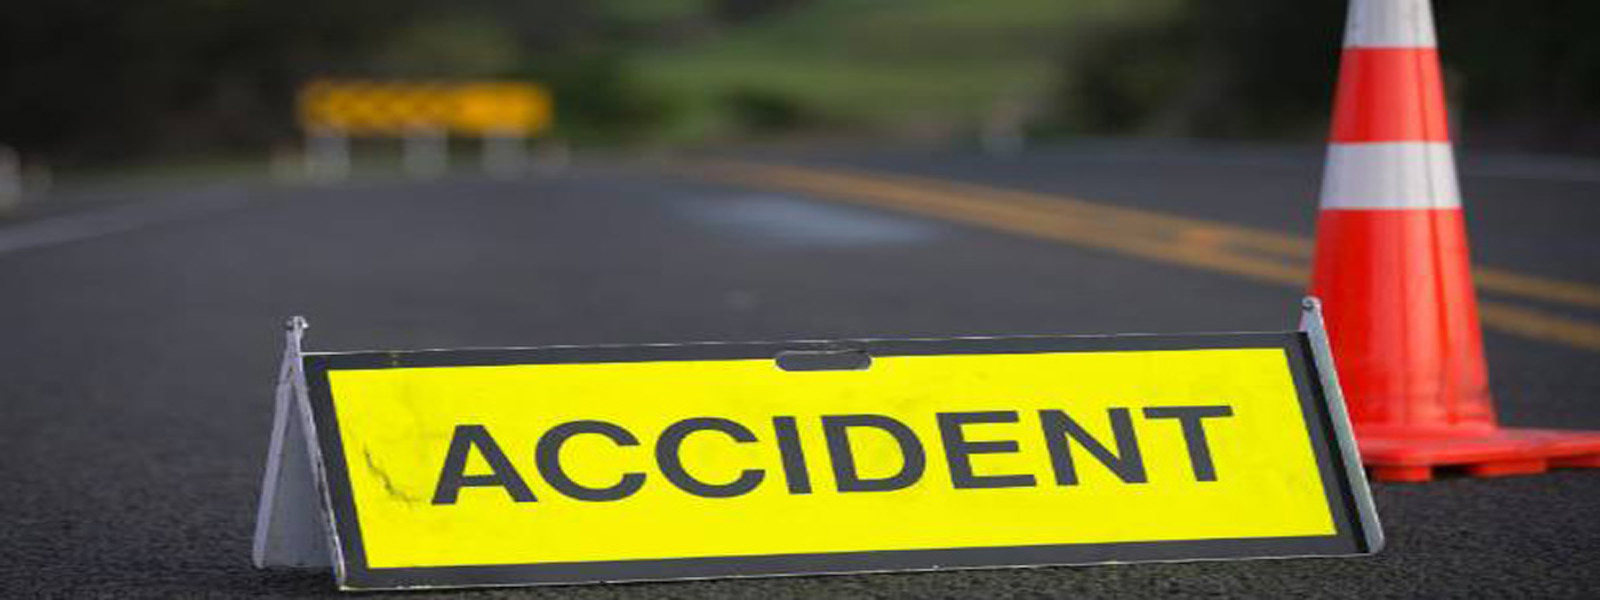 Woman dies from Accident in Thirappane